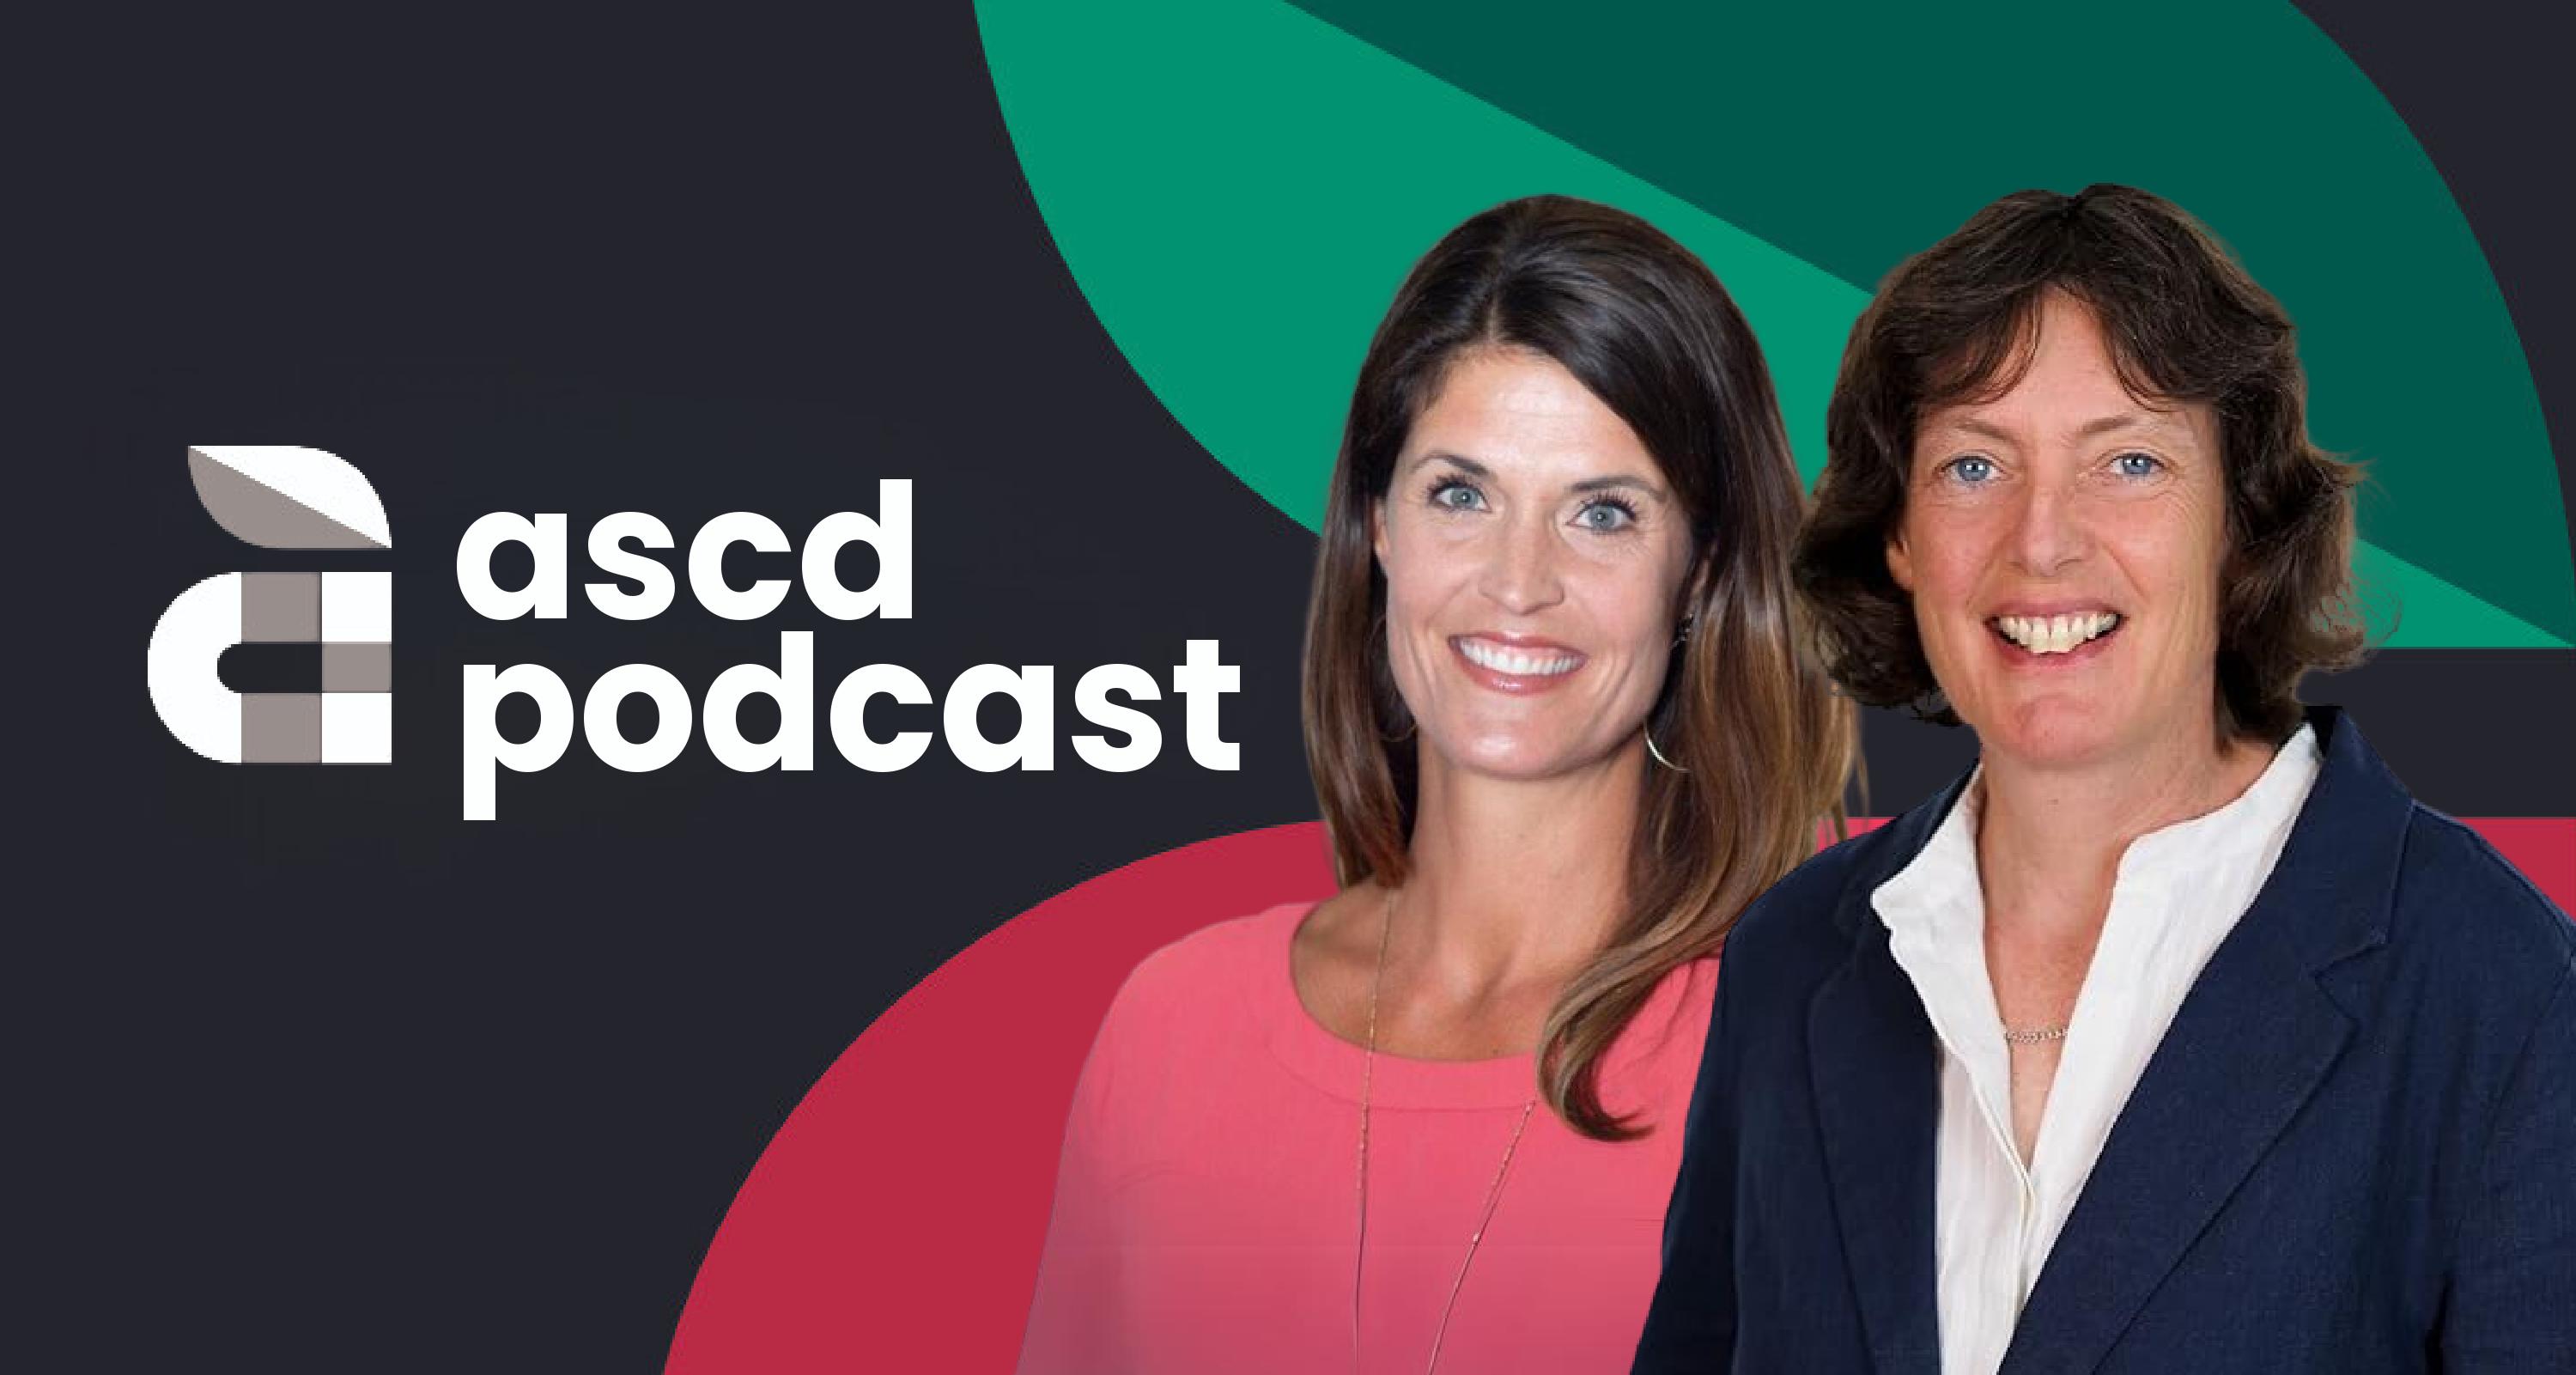 Portraits of podcast interviewees in front of "ascd podcast" text and ASCD's apple logo against a dark grey background